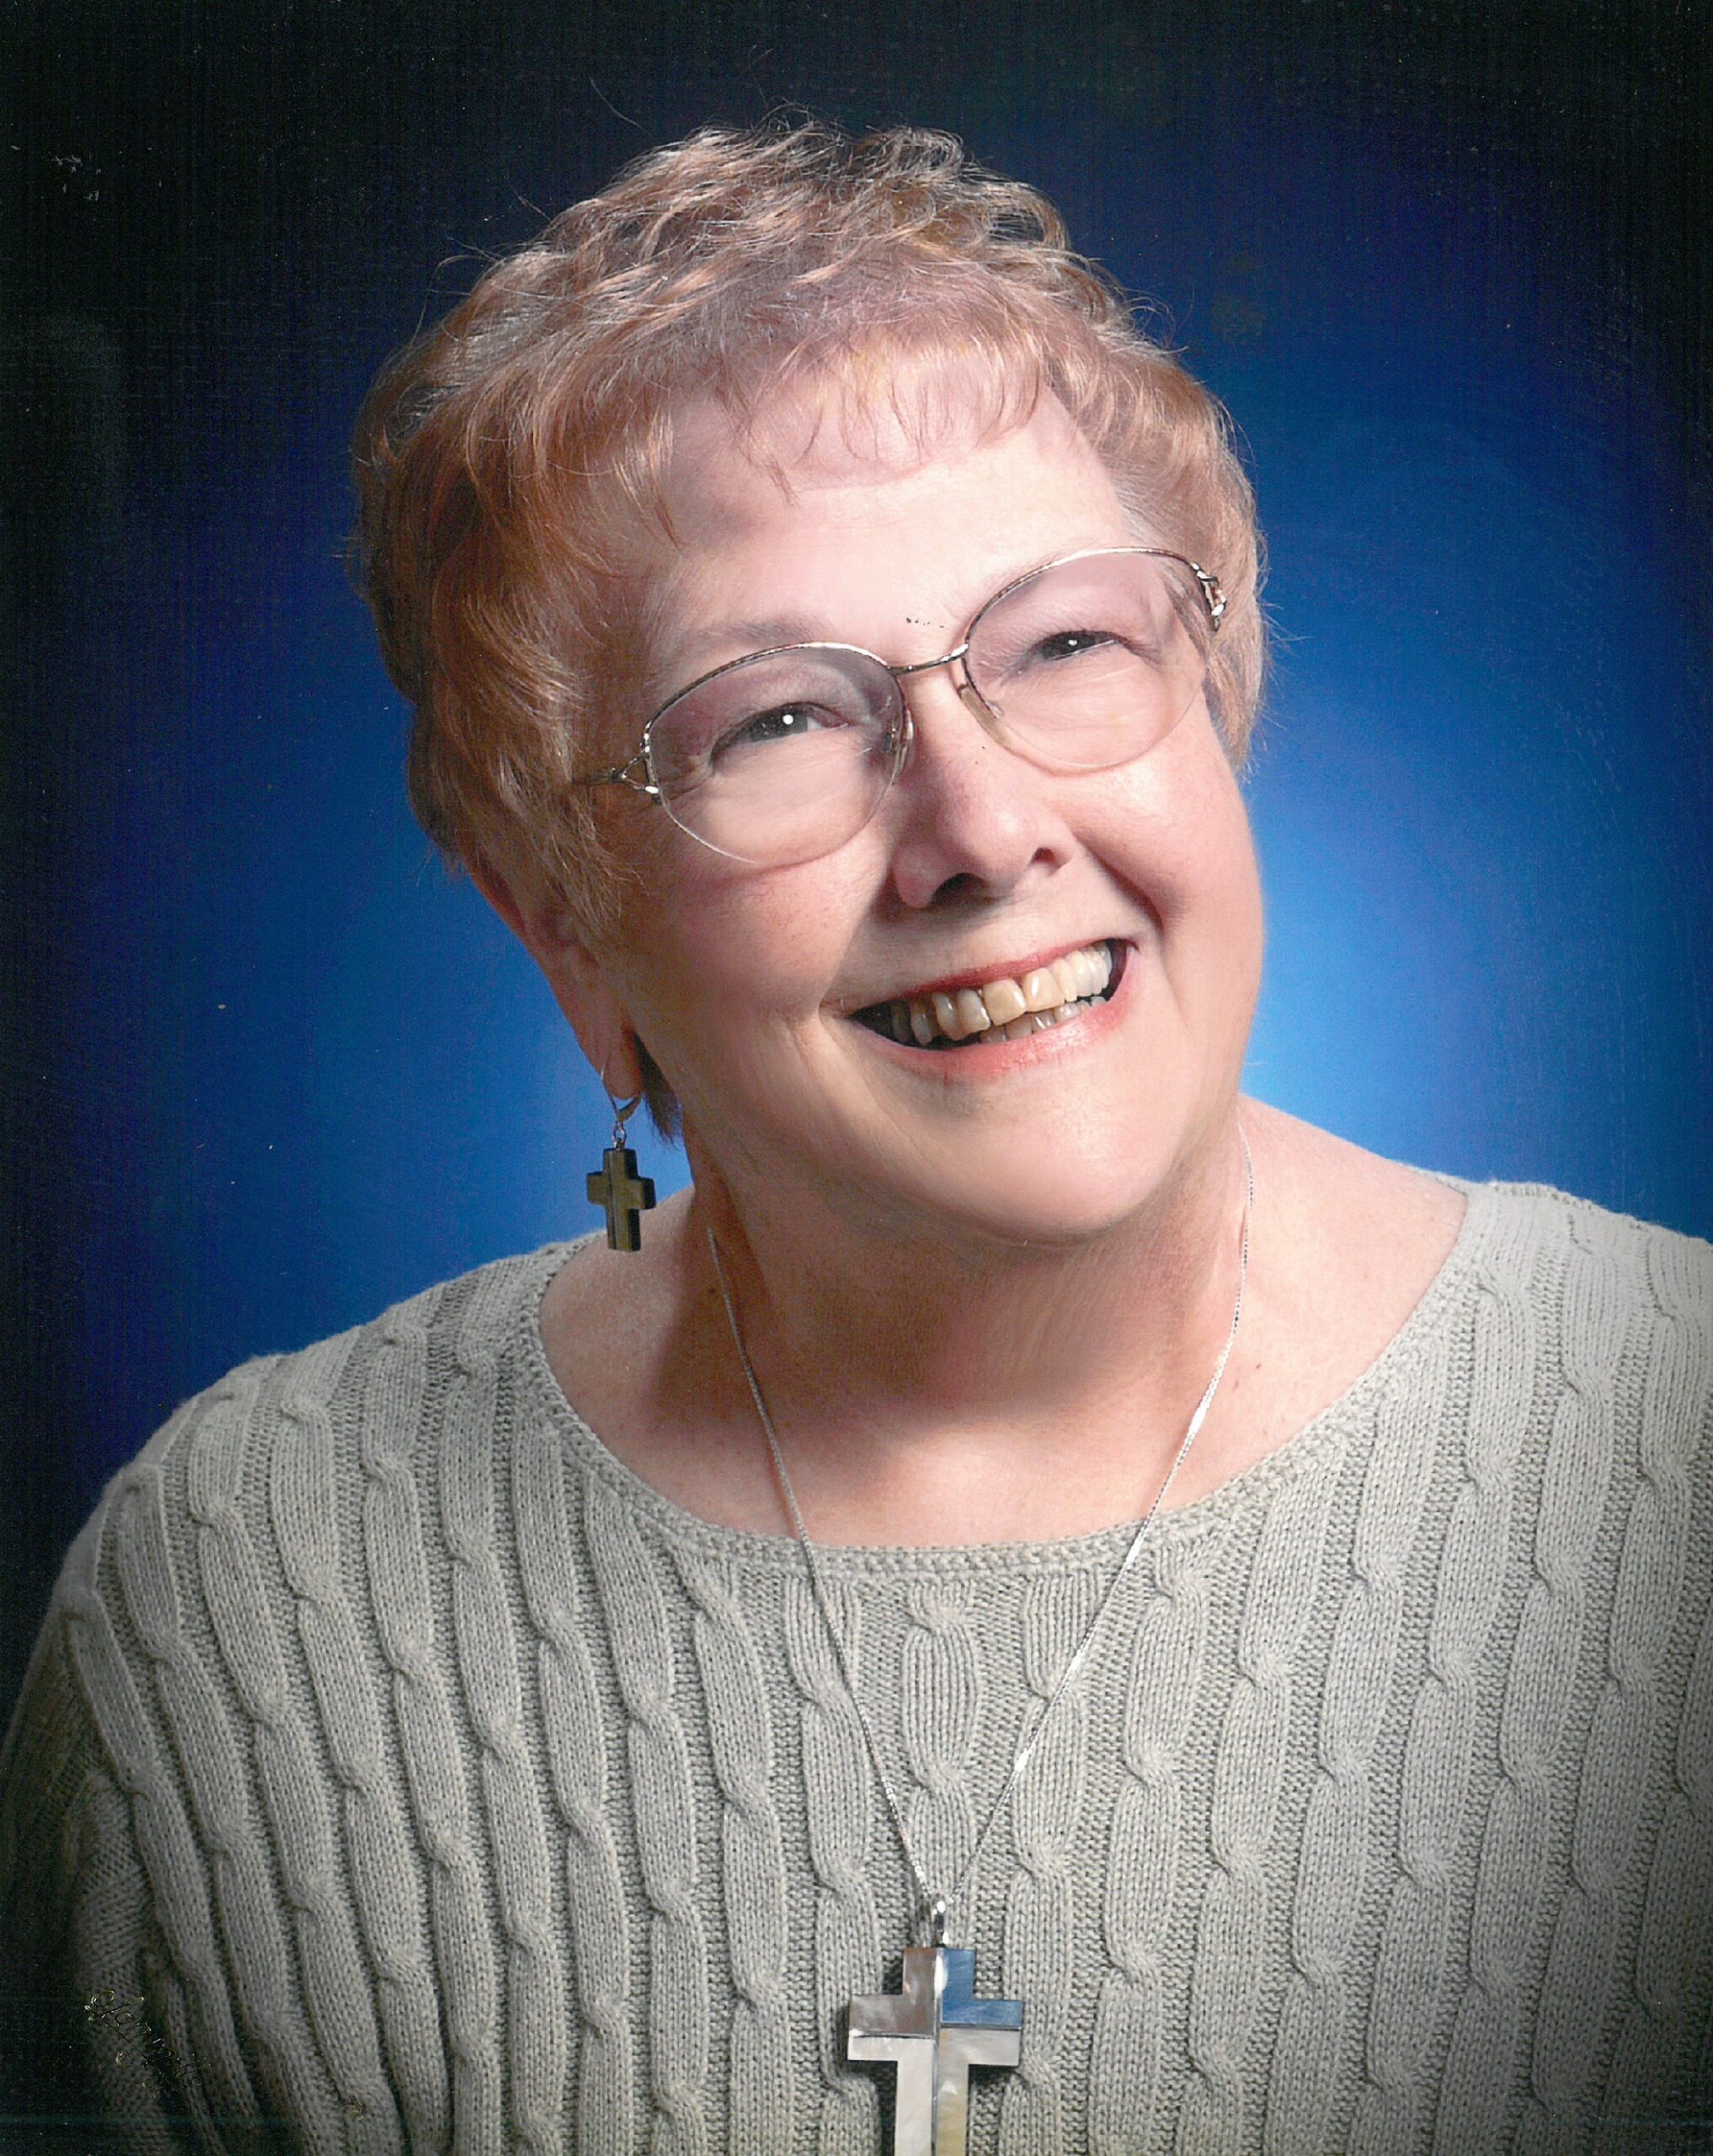 Obituary for Yvonne Waters